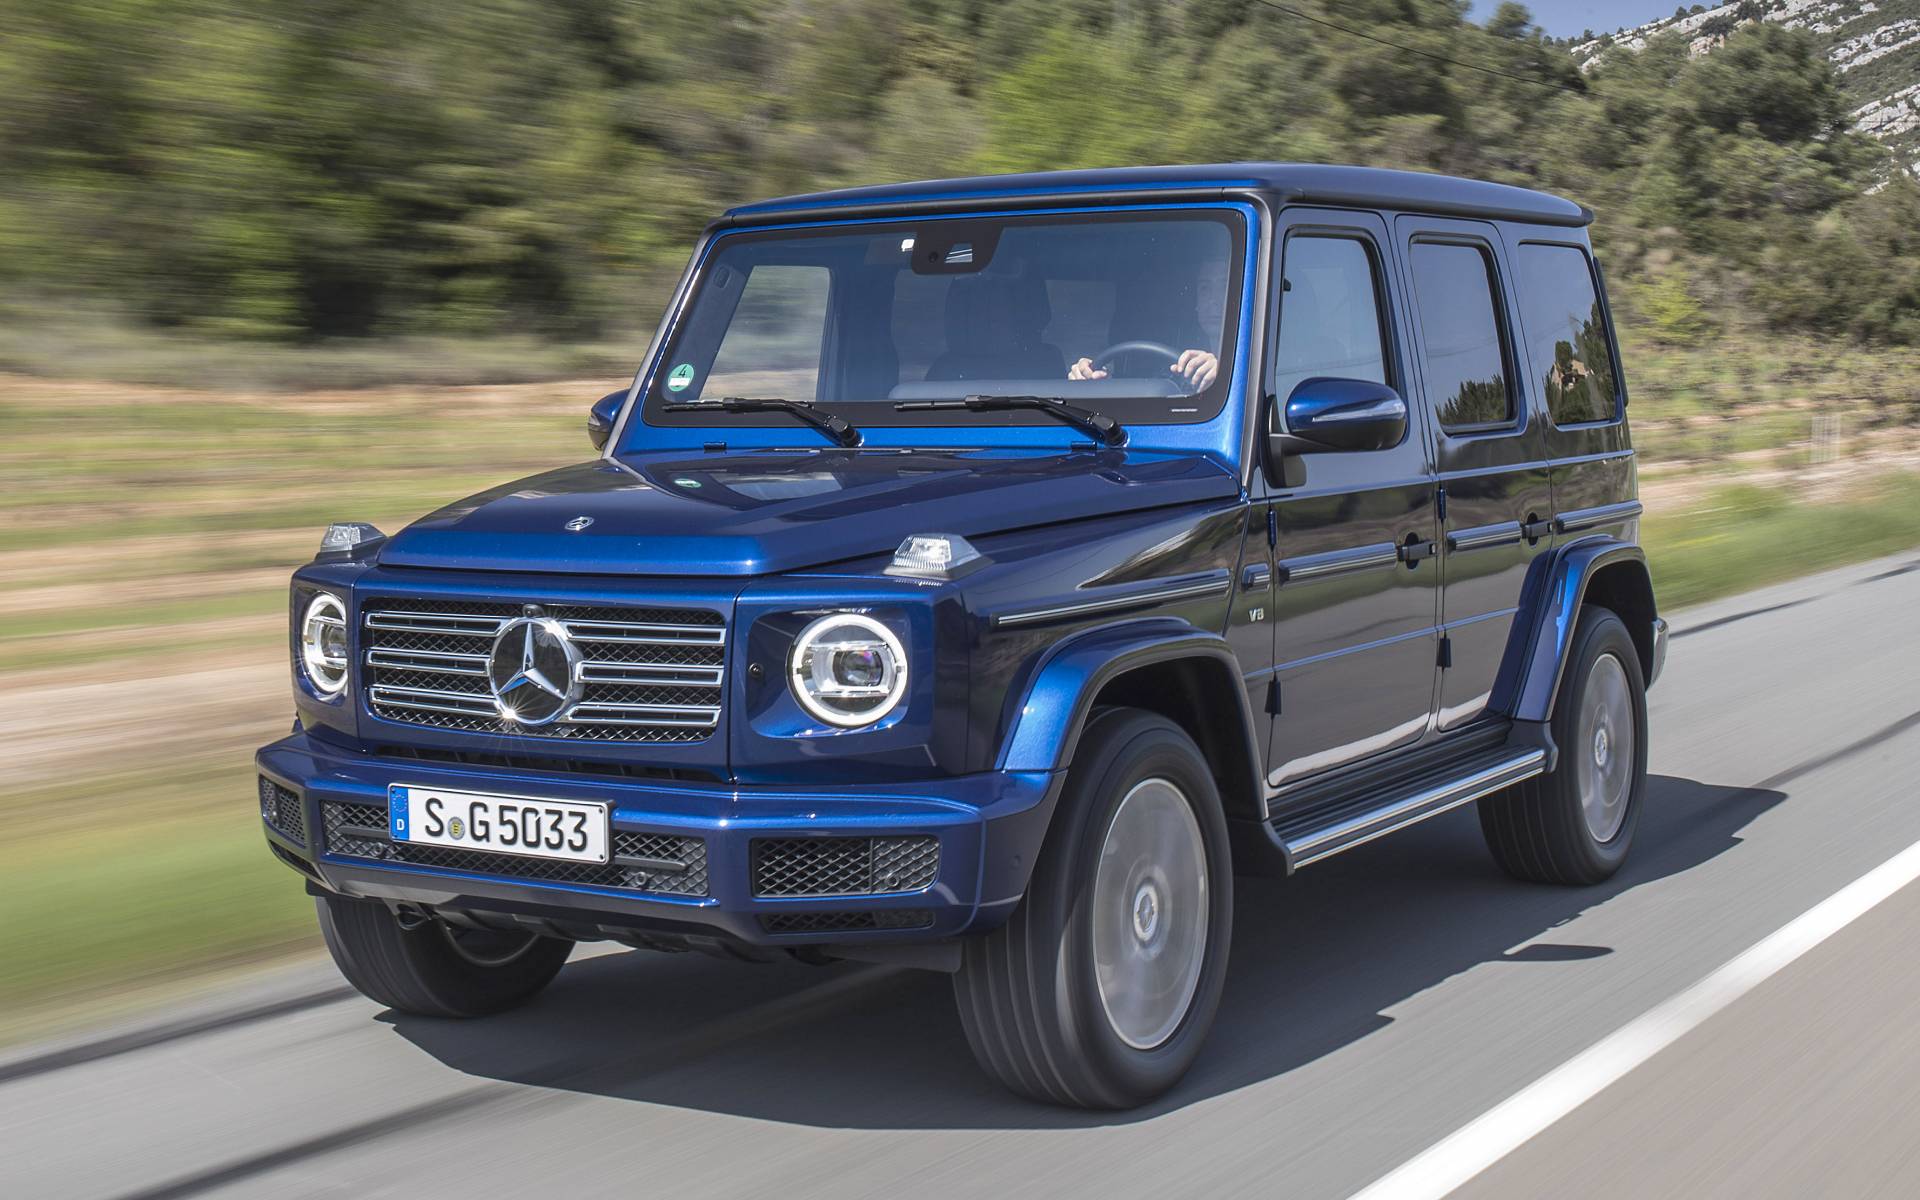 Mercedes Benz G Class News Reviews Picture Galleries And Videos The Car Guide